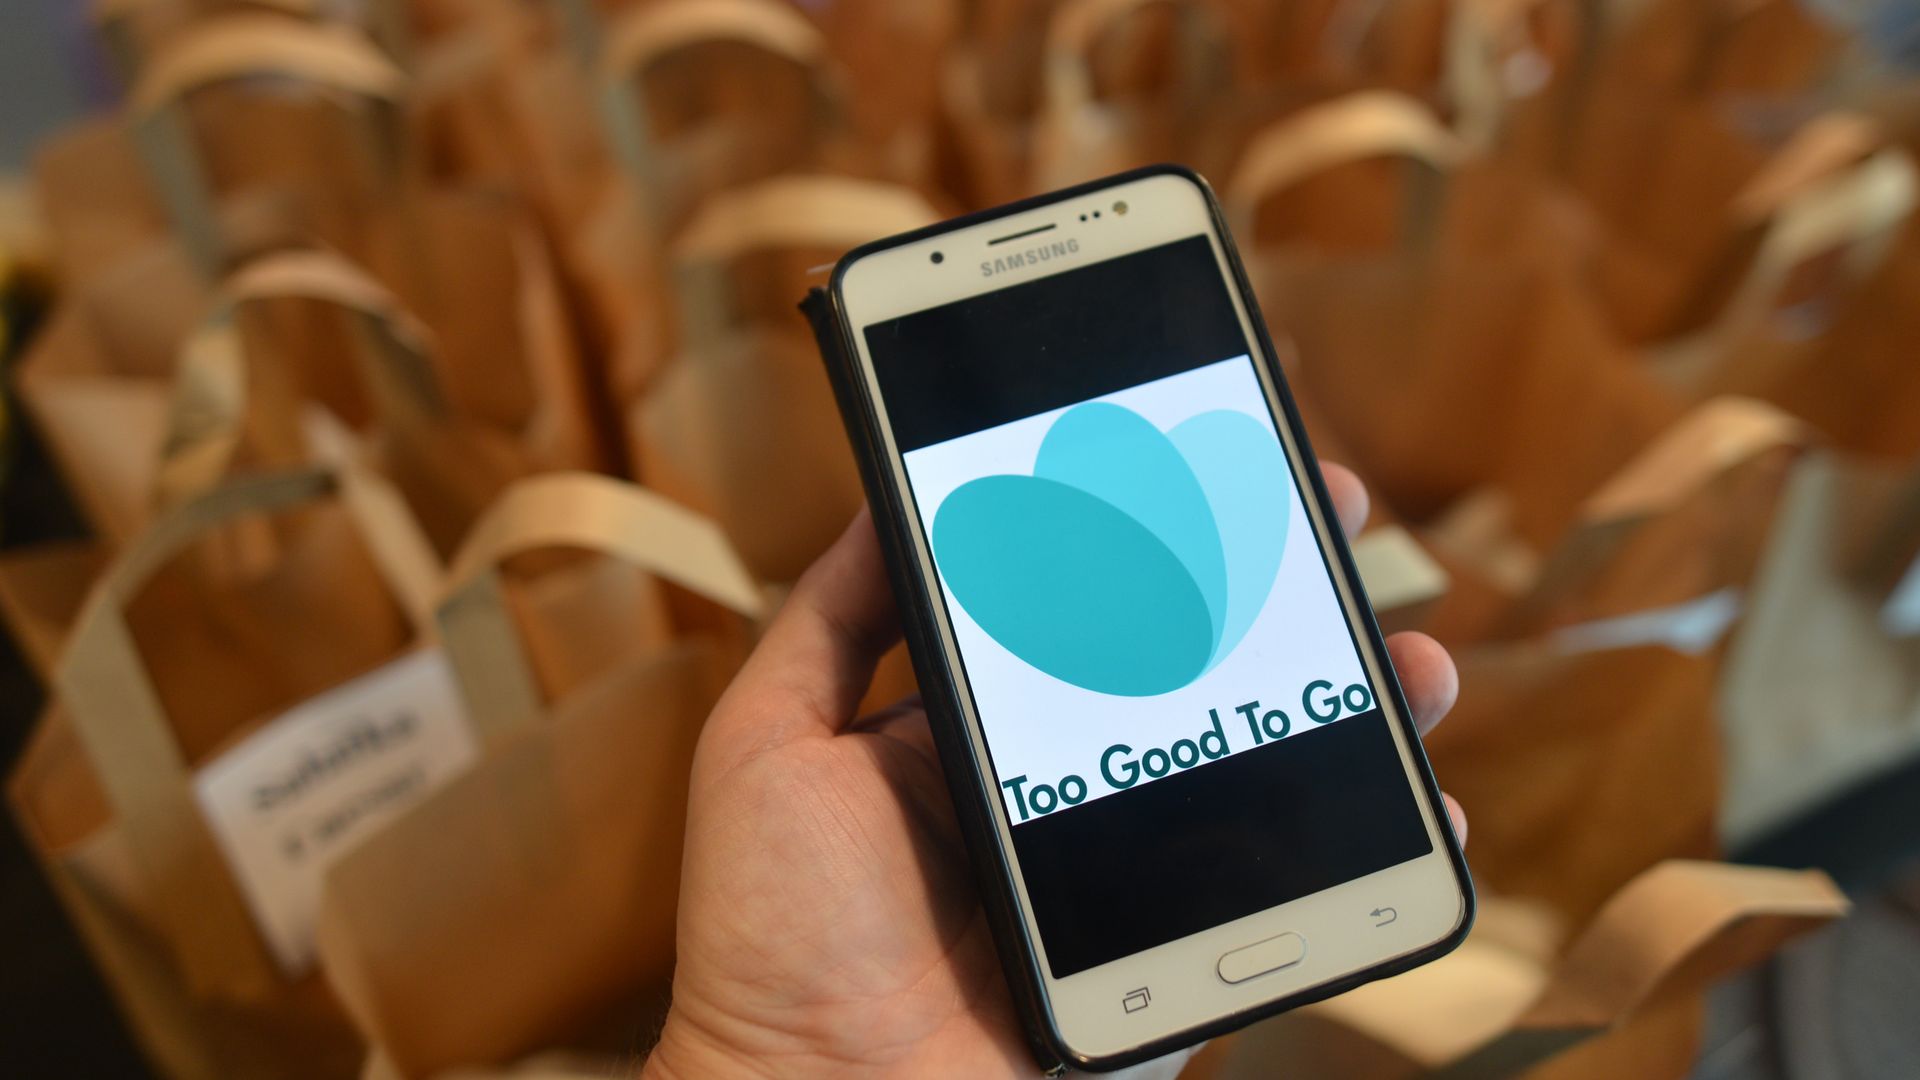 A photo of someone holding a cell phone with the too good to go logo with lots of paper bags in the background